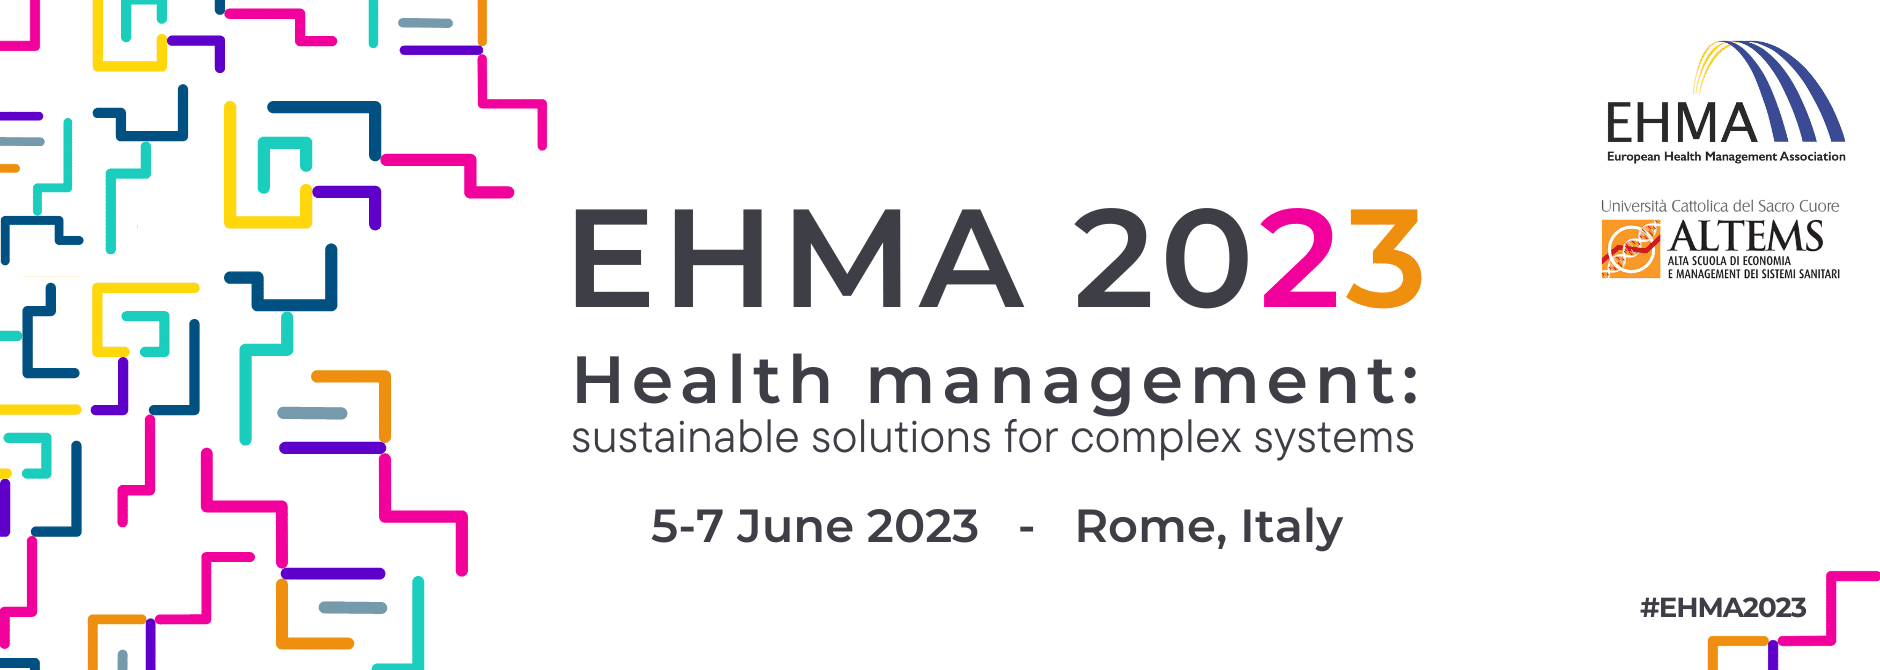 European Health Management Association – EHMA 2023 ANNUAL CONFERENCE